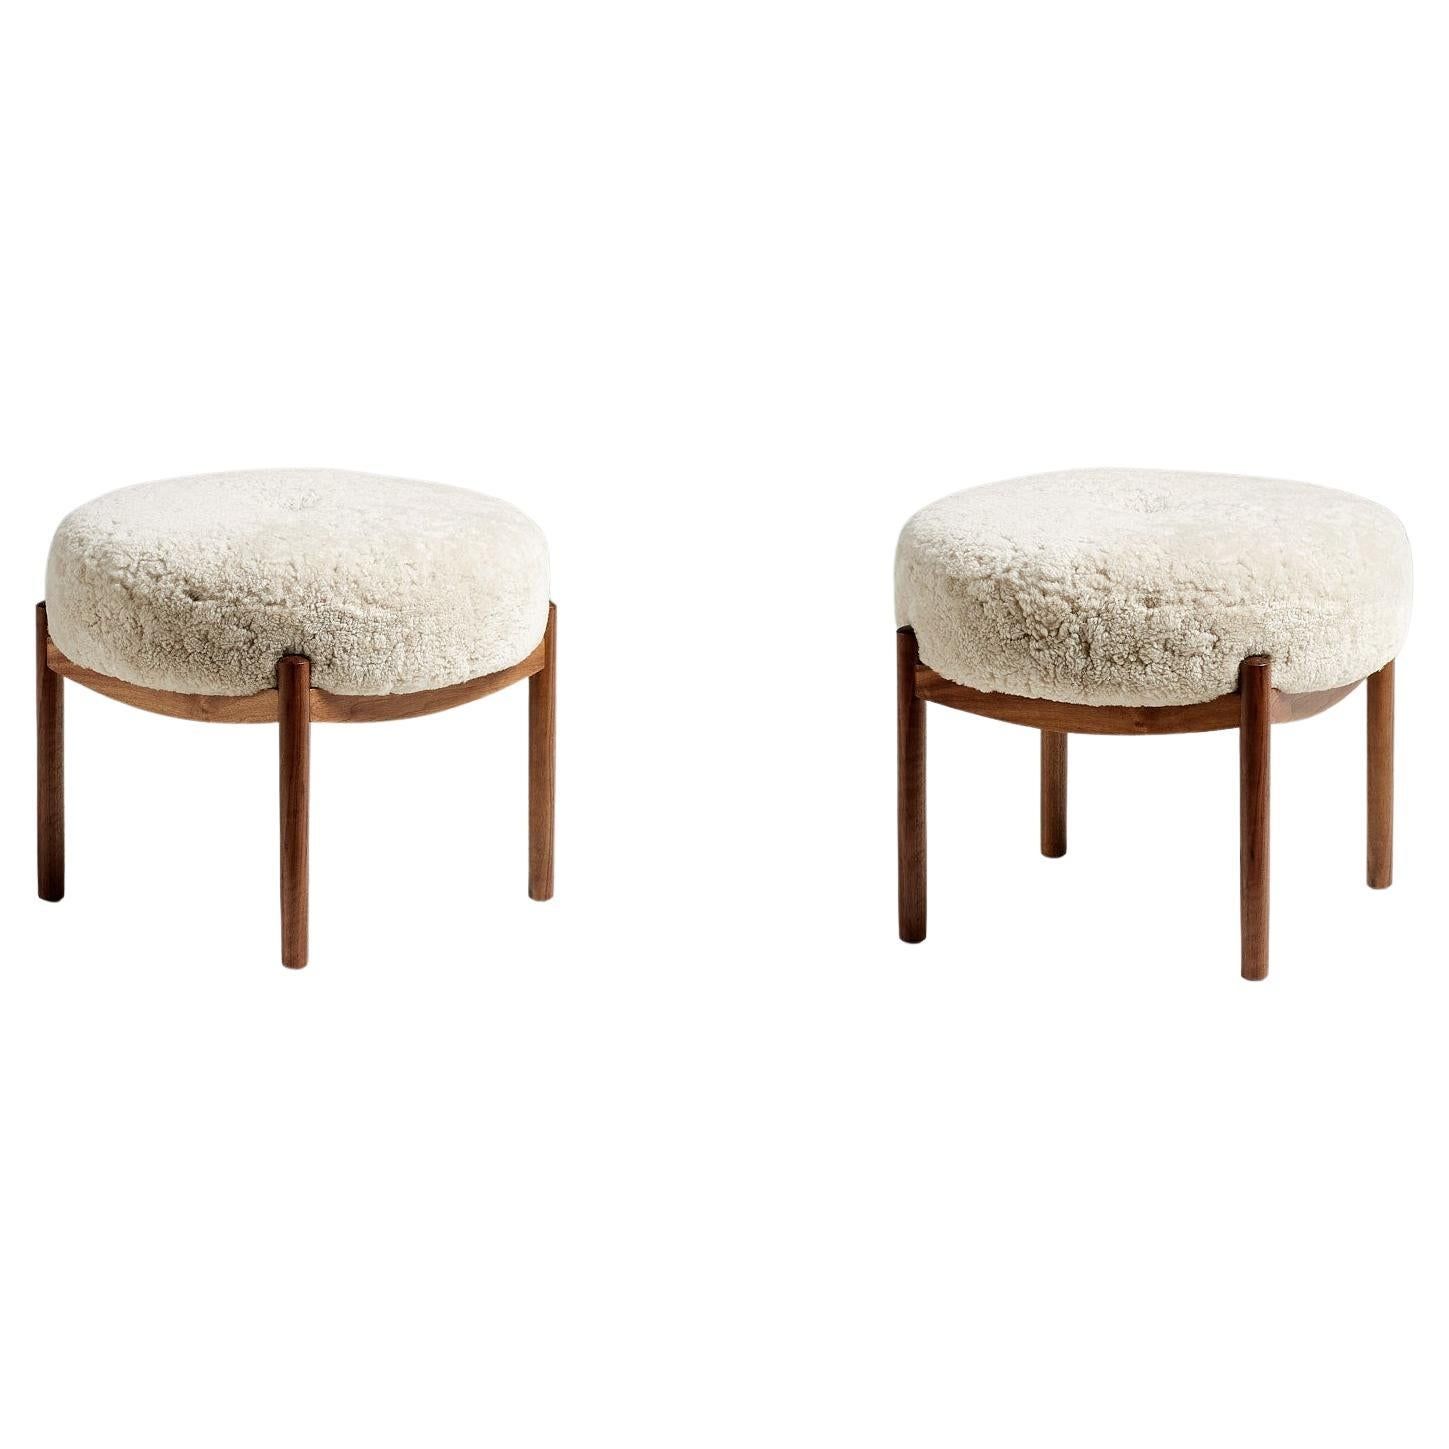 Pair Of Custom Made Walnut And Sheepskin Ottomans For Sale At 1stdibs For Walnut Round Ottomans (View 8 of 15)